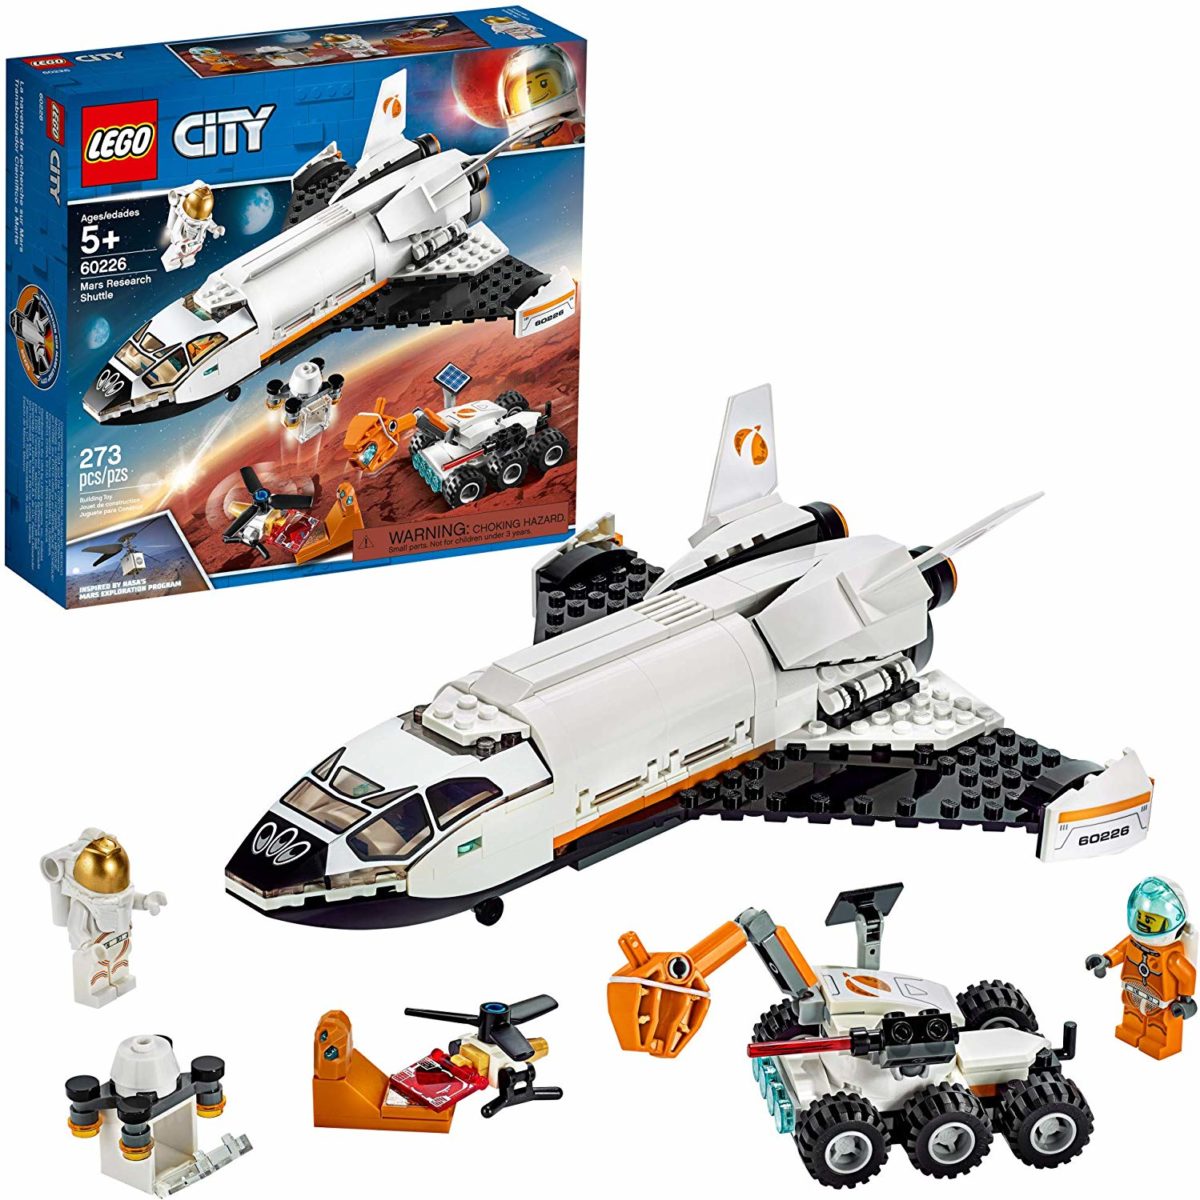 LEGO City Space Mars Research Shuttle - Top Toys and Gifts for Seven Year Old Boys 1